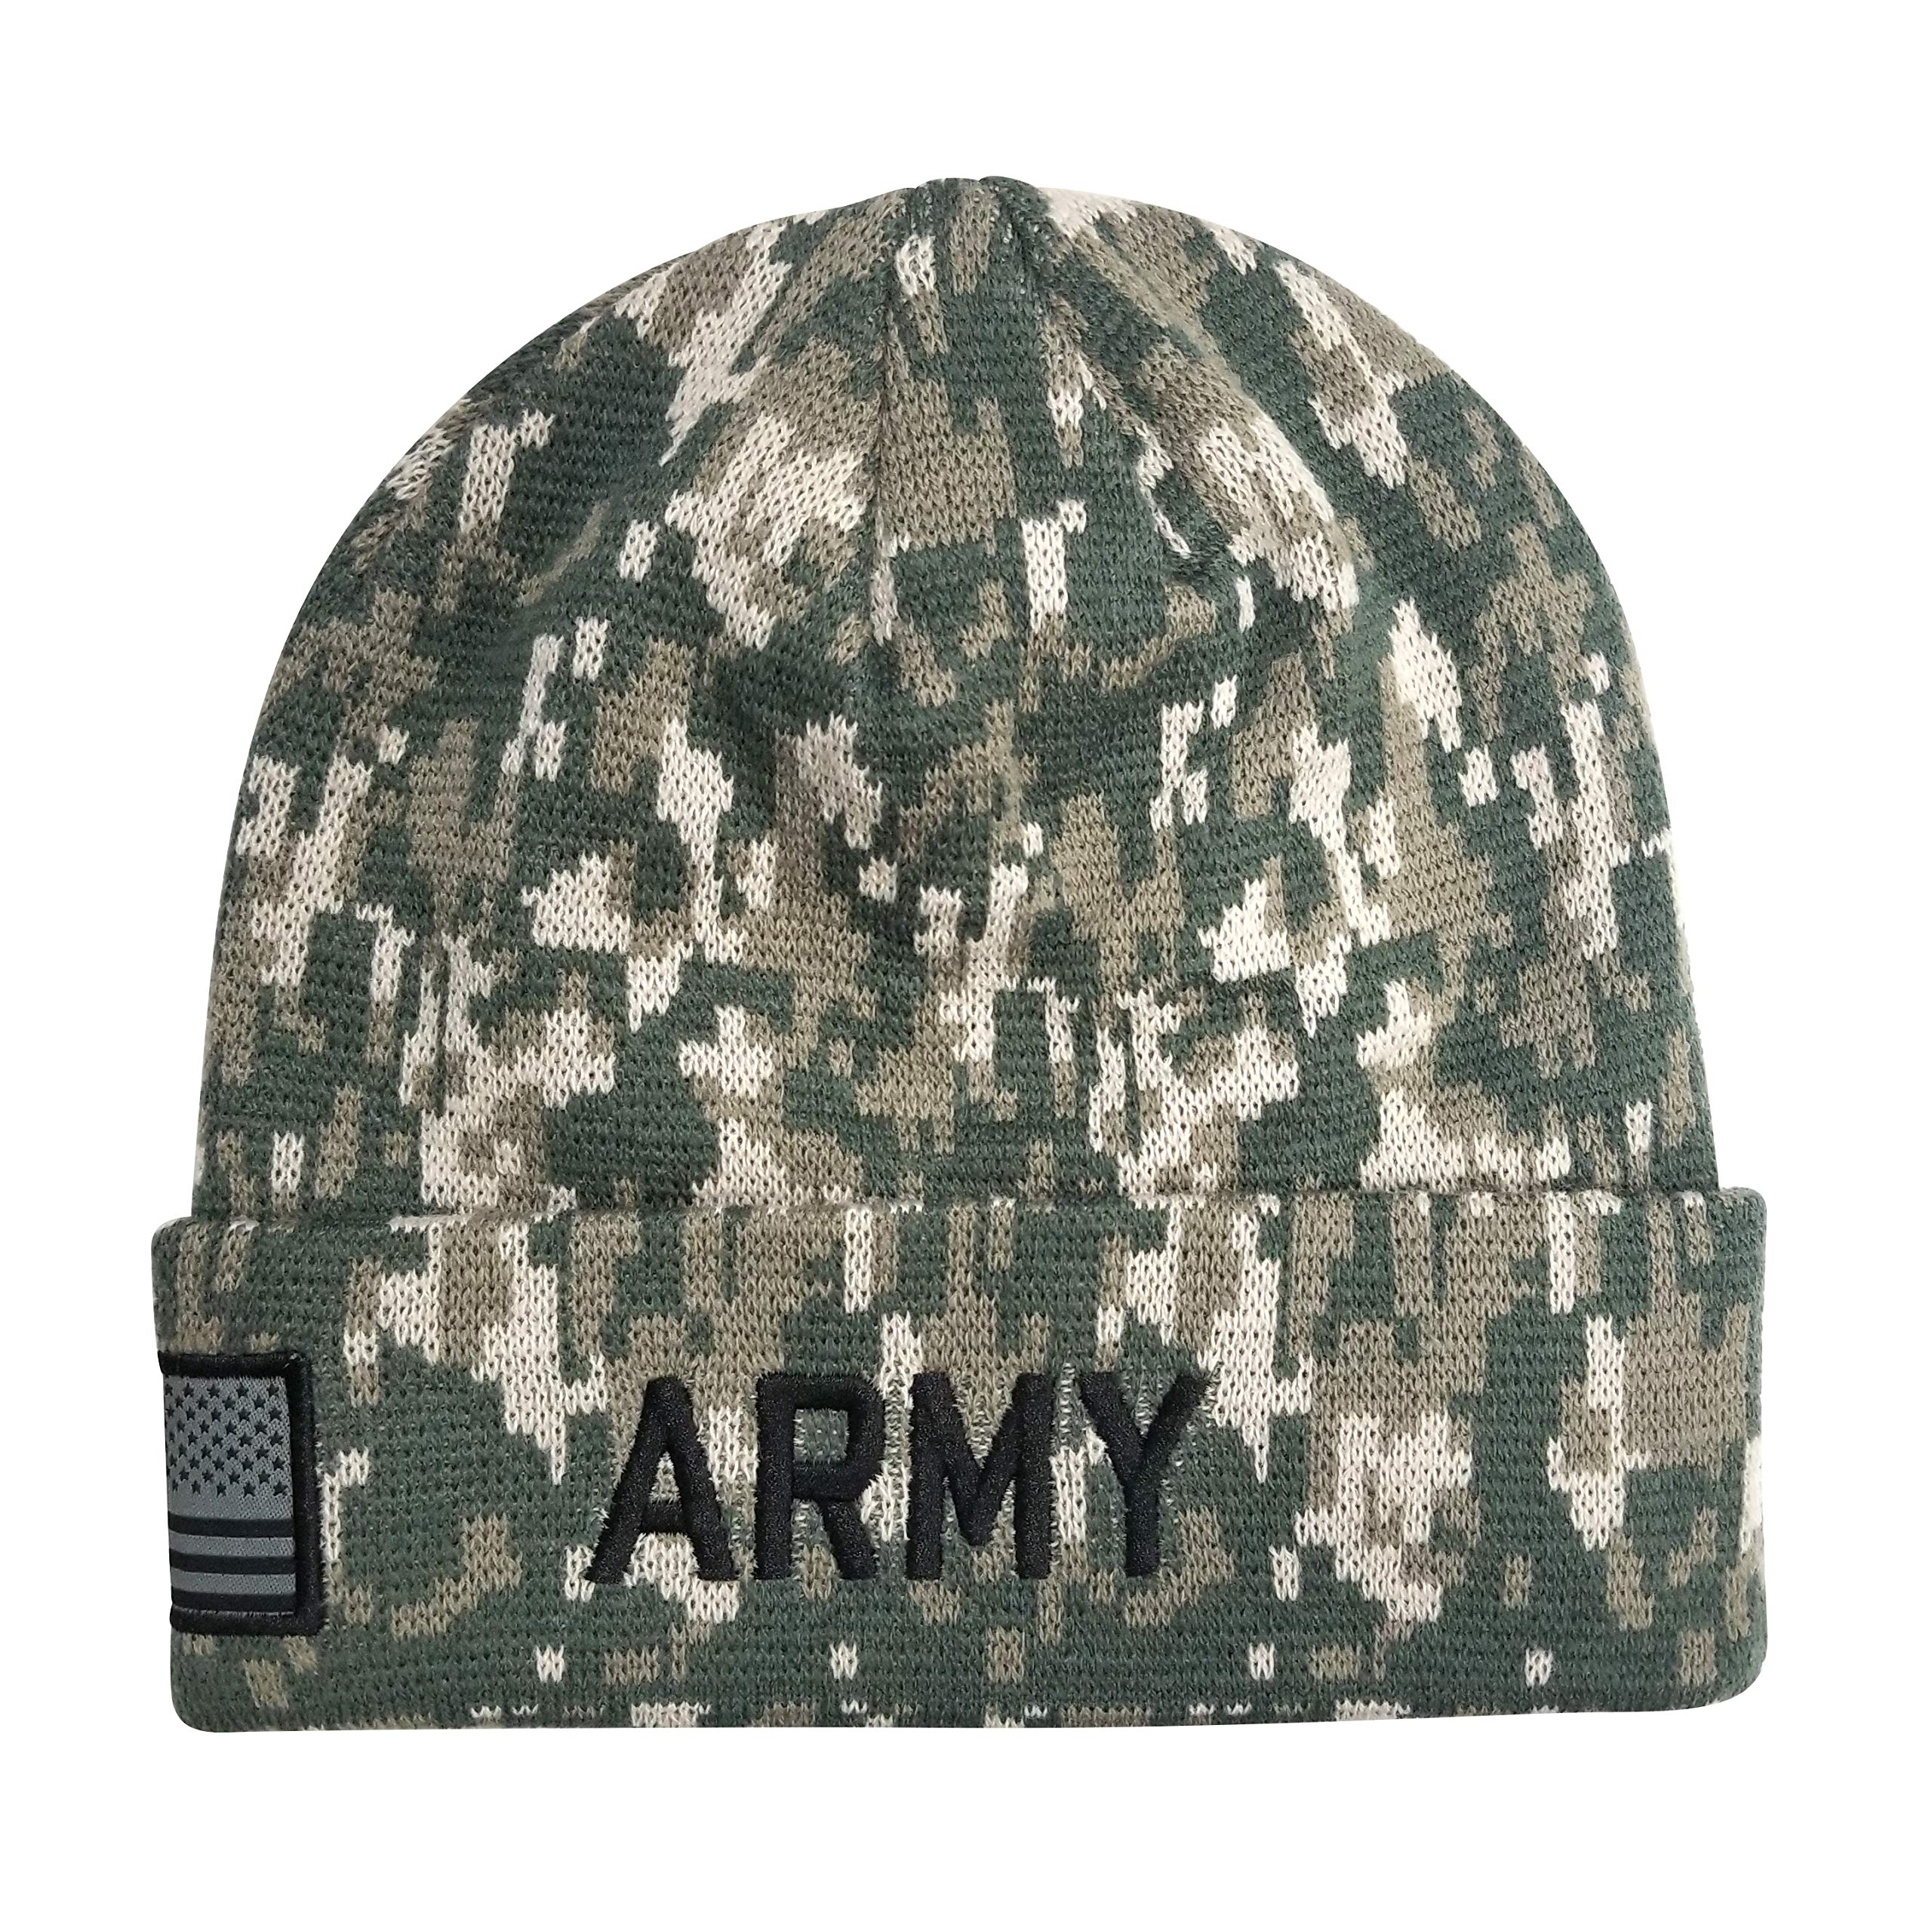 U.S. Army Beanie in Digital Camo for Adult Unisex Men and Women, Military Winter Knit Hats for Veterans